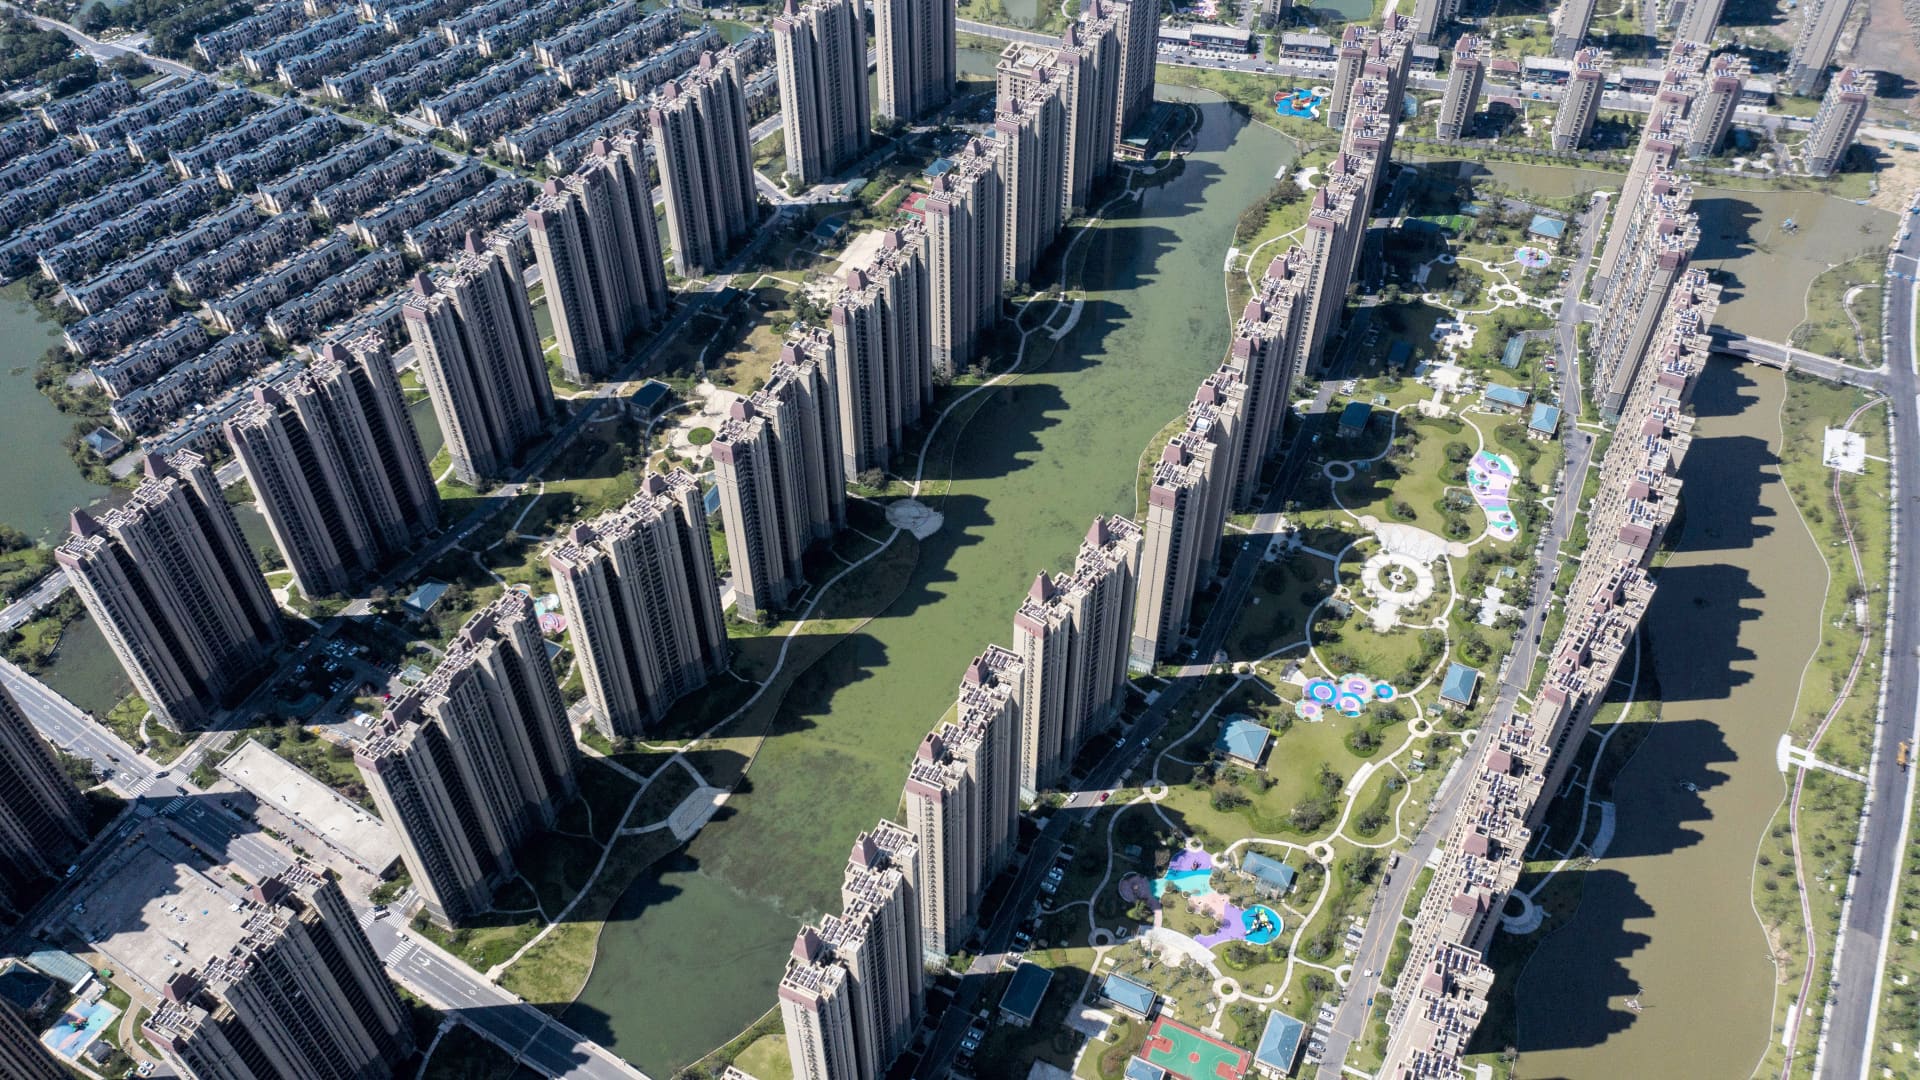 Apartment buildings and recreational facilities at China Evergrande Group's Life in Venice real estate and tourism development in Qidong, Jiangsu province, China, on Tuesday, Sept. 21, 2021.